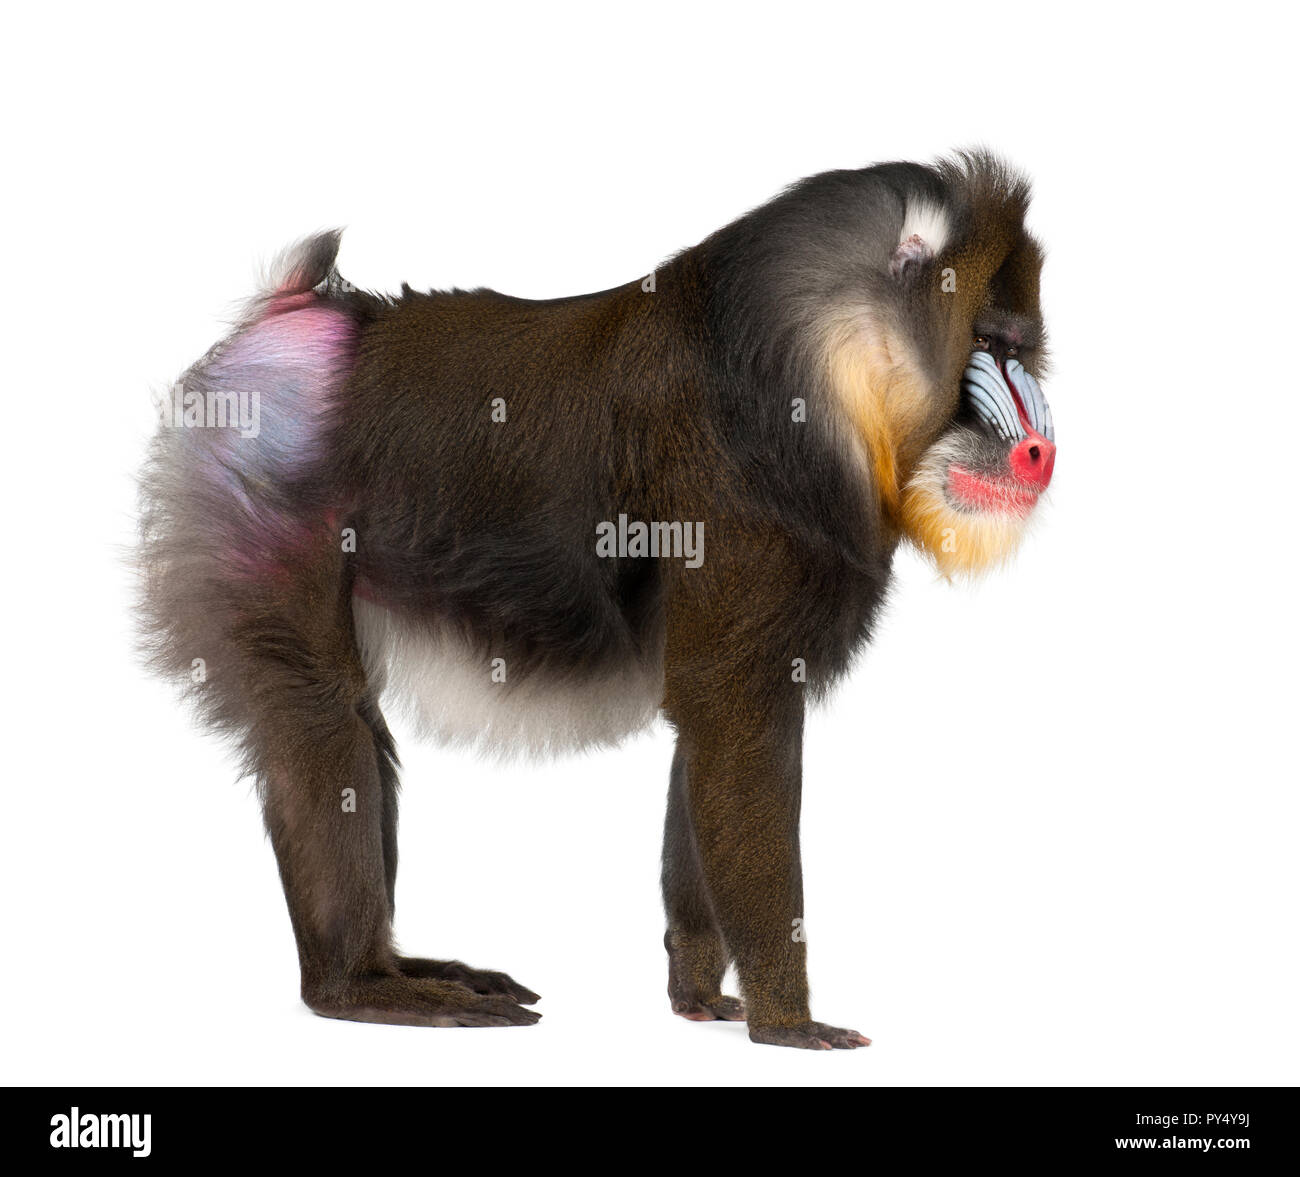 Mandrill, Mandrillus sphinx, 22 years old, primate of the Old World monkey family against white background Stock Photo